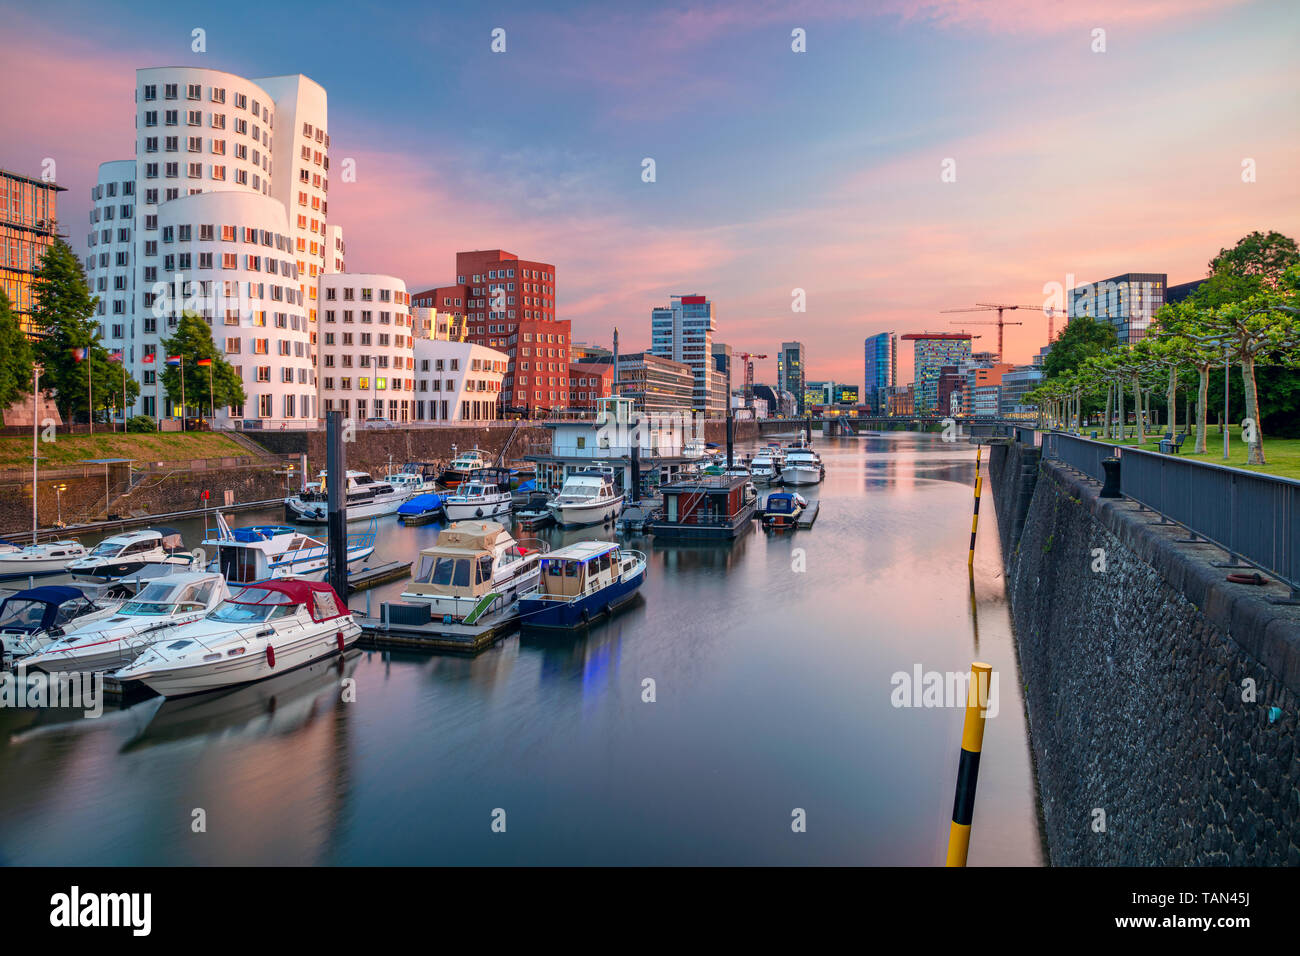 Düsseldorf, Germany. Cityscape image of Düsseldorf, Germany with the Media Harbour and reflection of the city in the Rhine river, during sunset. Stock Photo